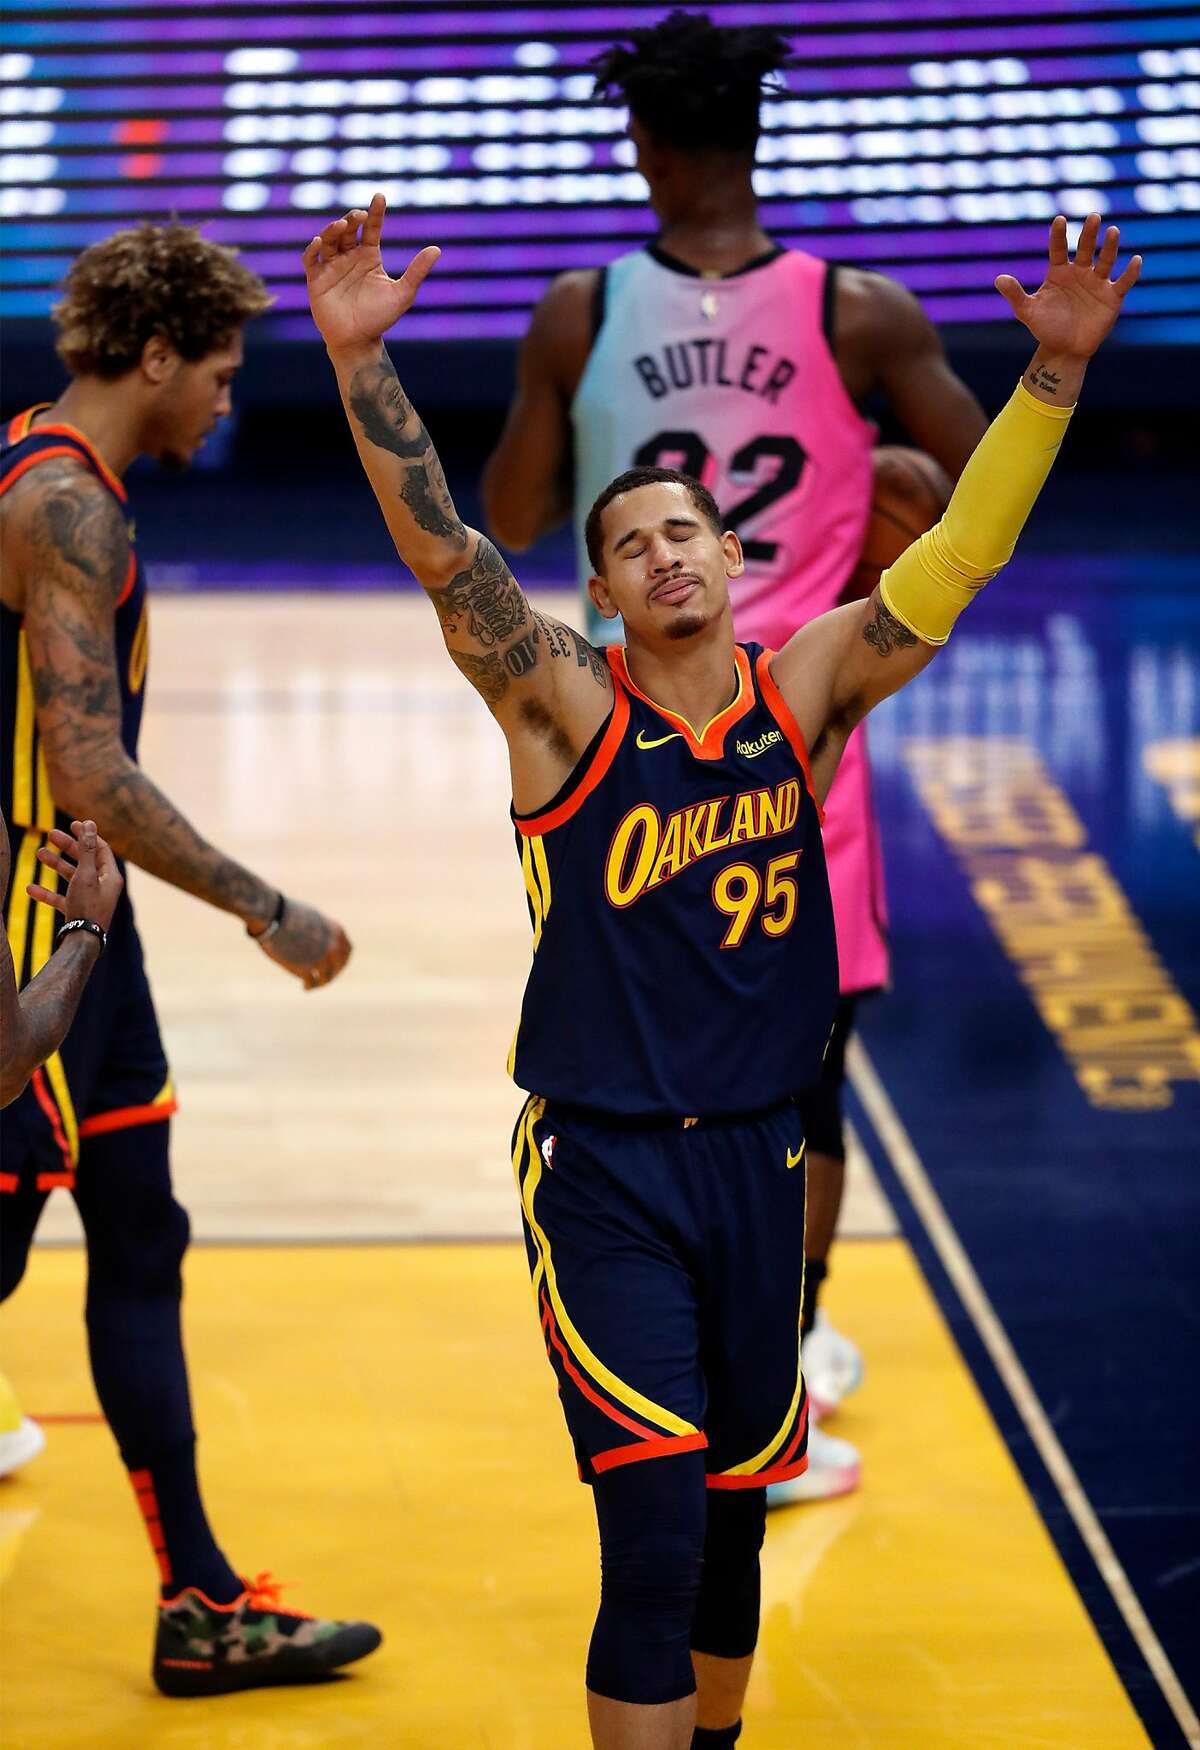 Golden State Warriors' Juan Toscano-Anderson disputes fouling Miami Heat's Jimmy Butler in 1st quarter during NBA, basketball game at Chase Center in San Francisco, Calif., on Wednesday, February 17, 2021.